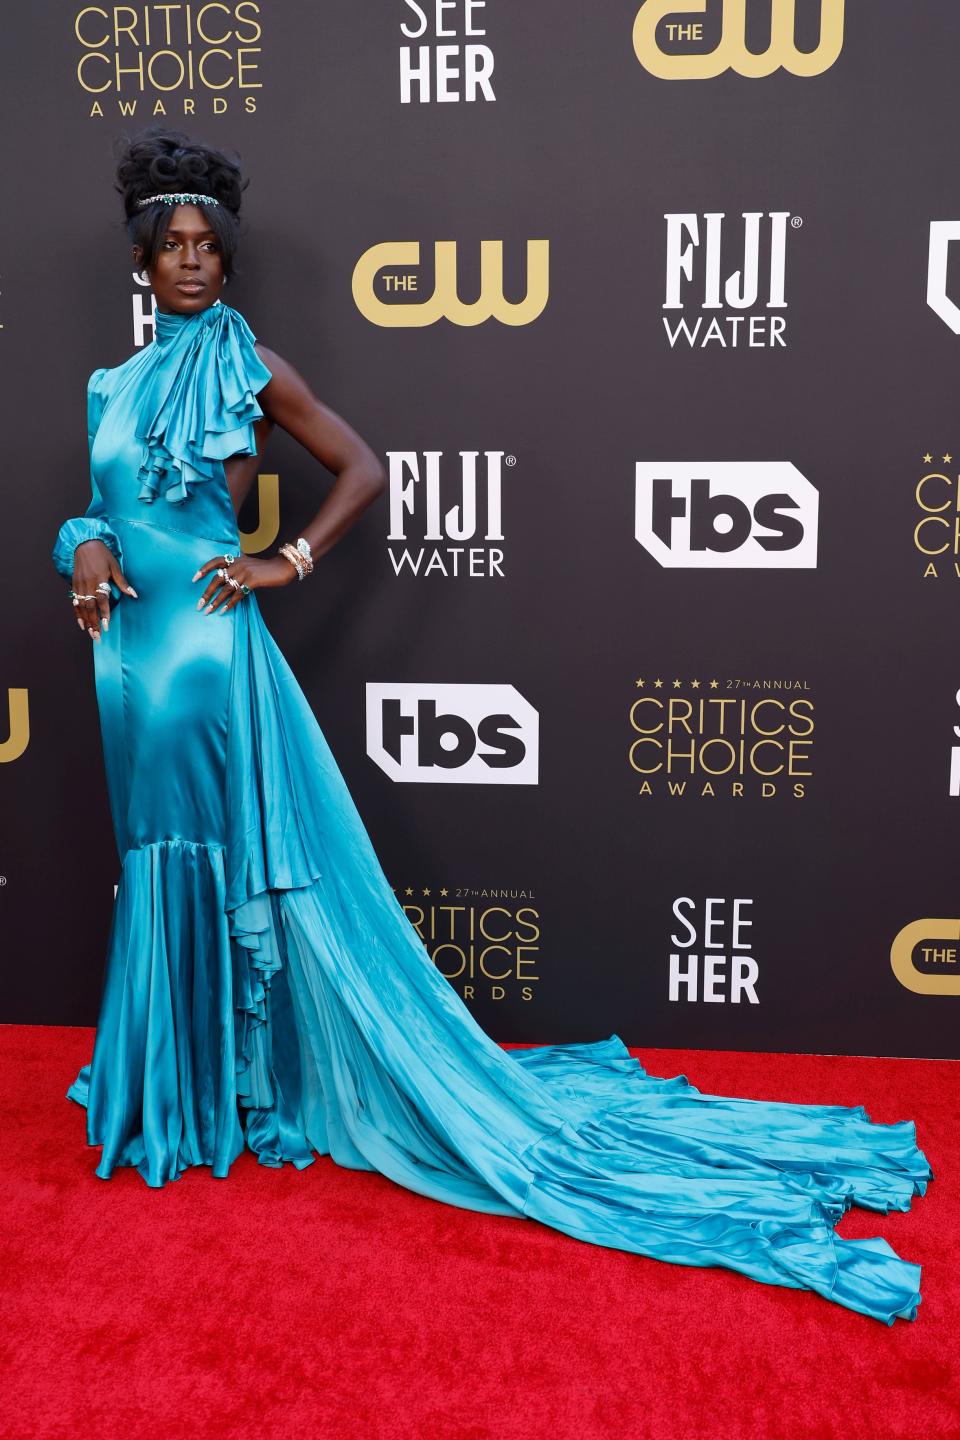 Jodie Turner-Smith attends the 27th Annual Critics Choice Awards on March 13, 2022 in Los Angeles, California.